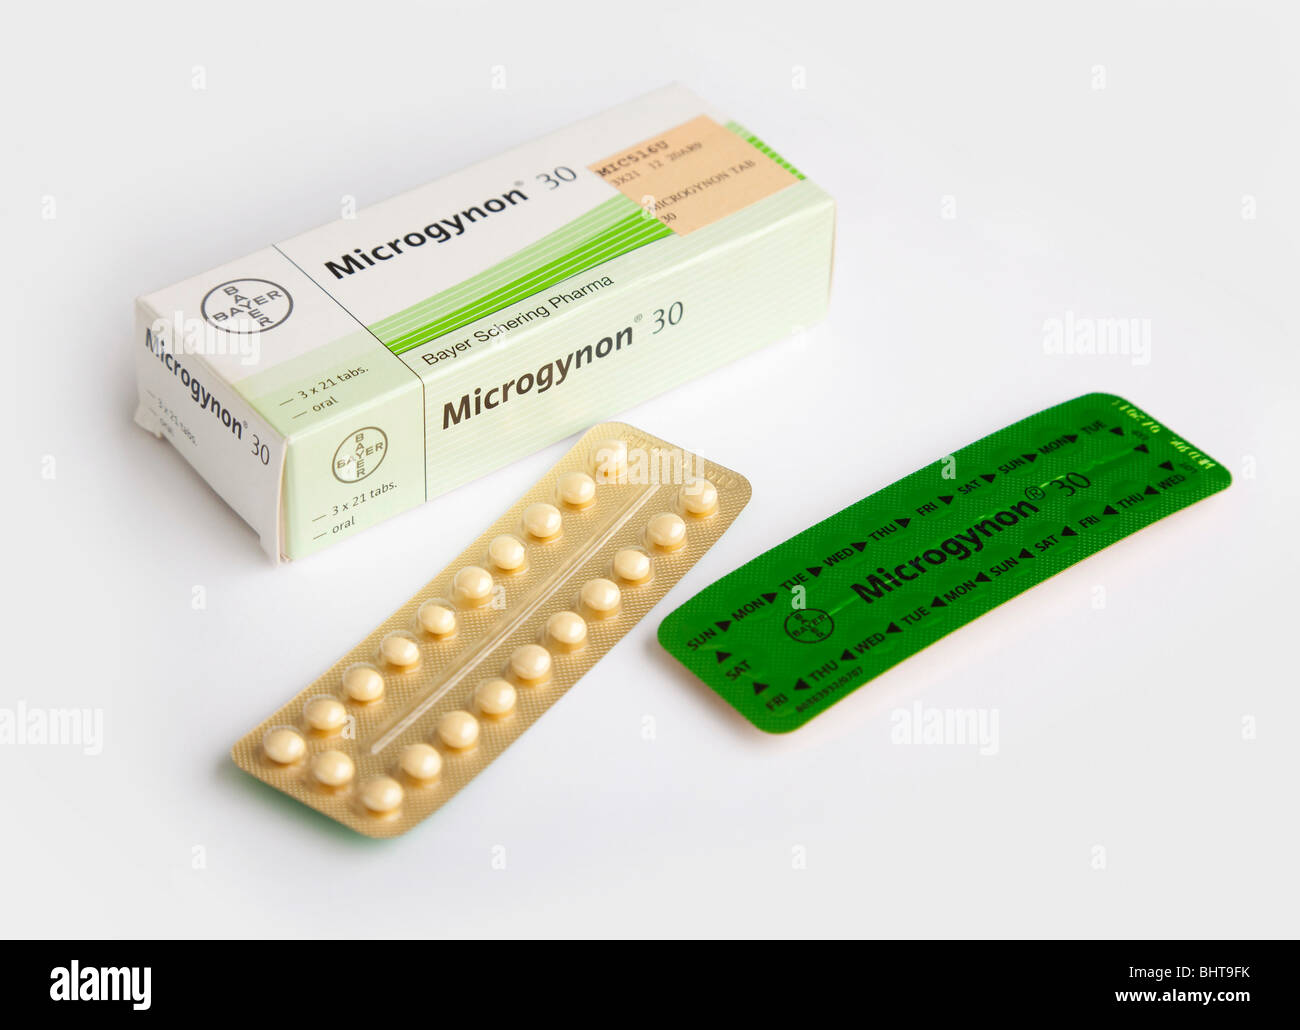 Bayer Microgynon 30 pilules contraceptives orales Banque D'Images